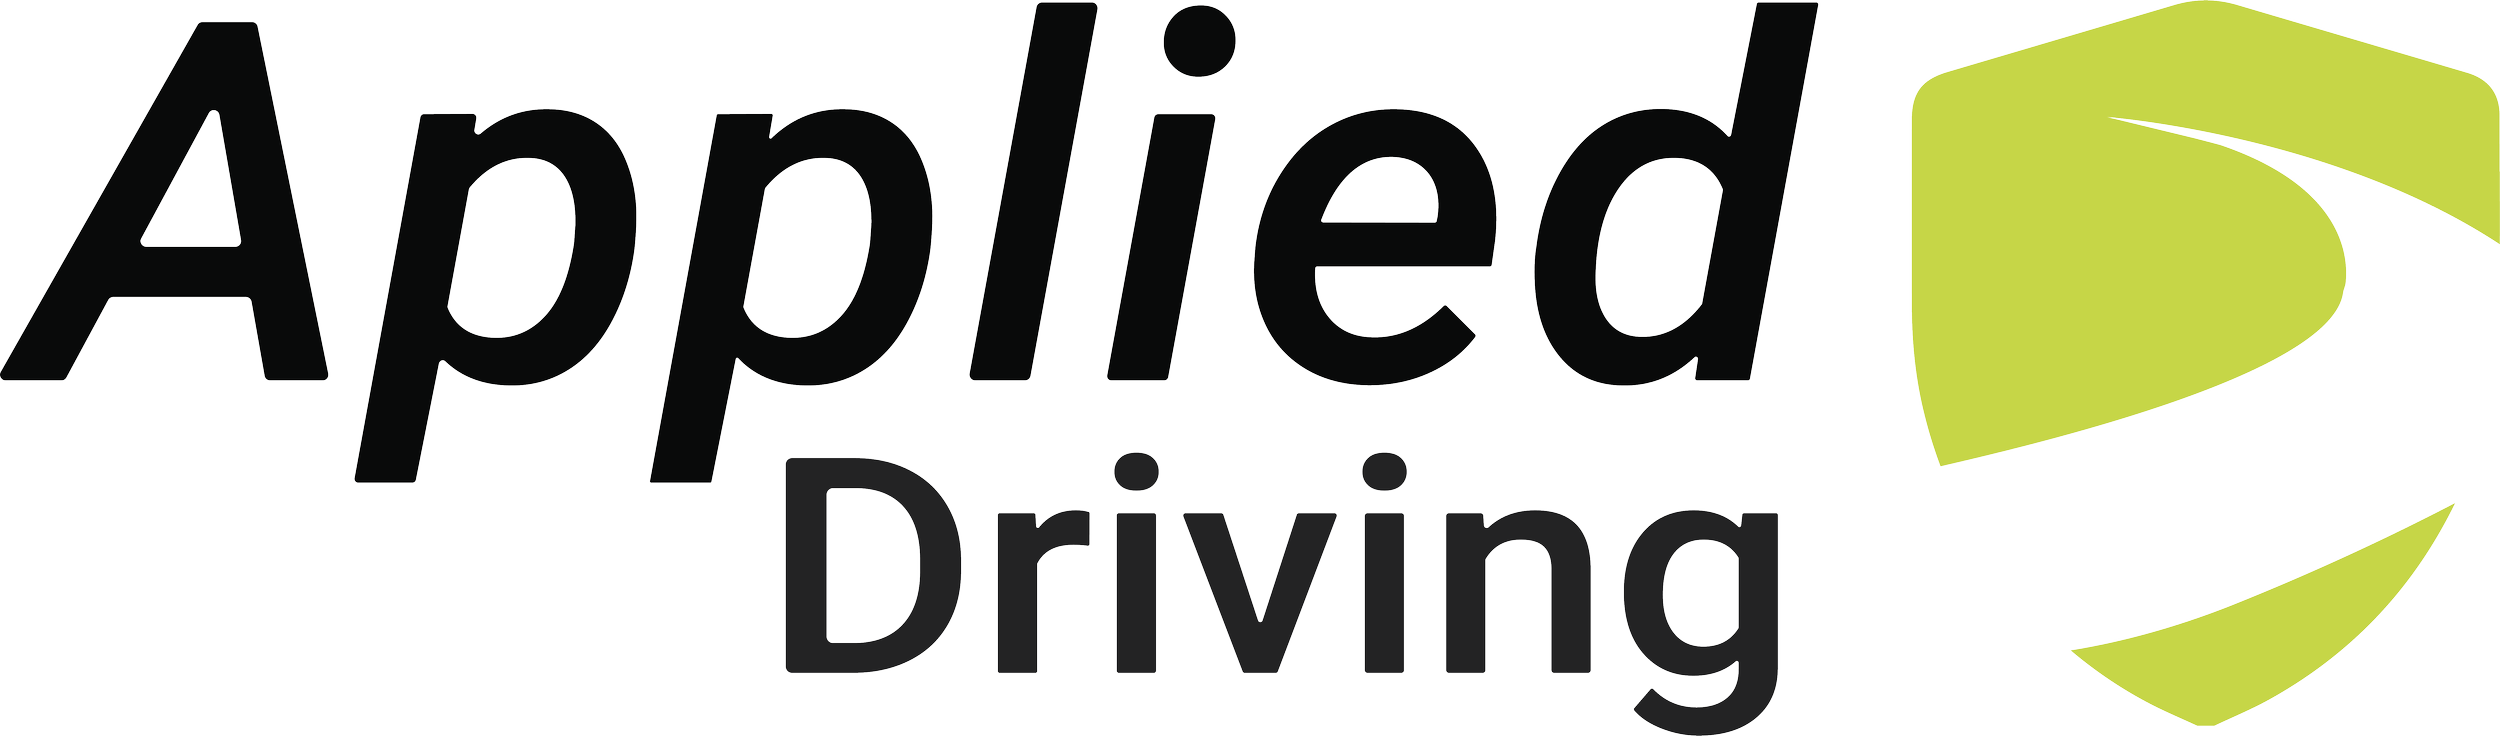 Applied Driving Logo - Black.png